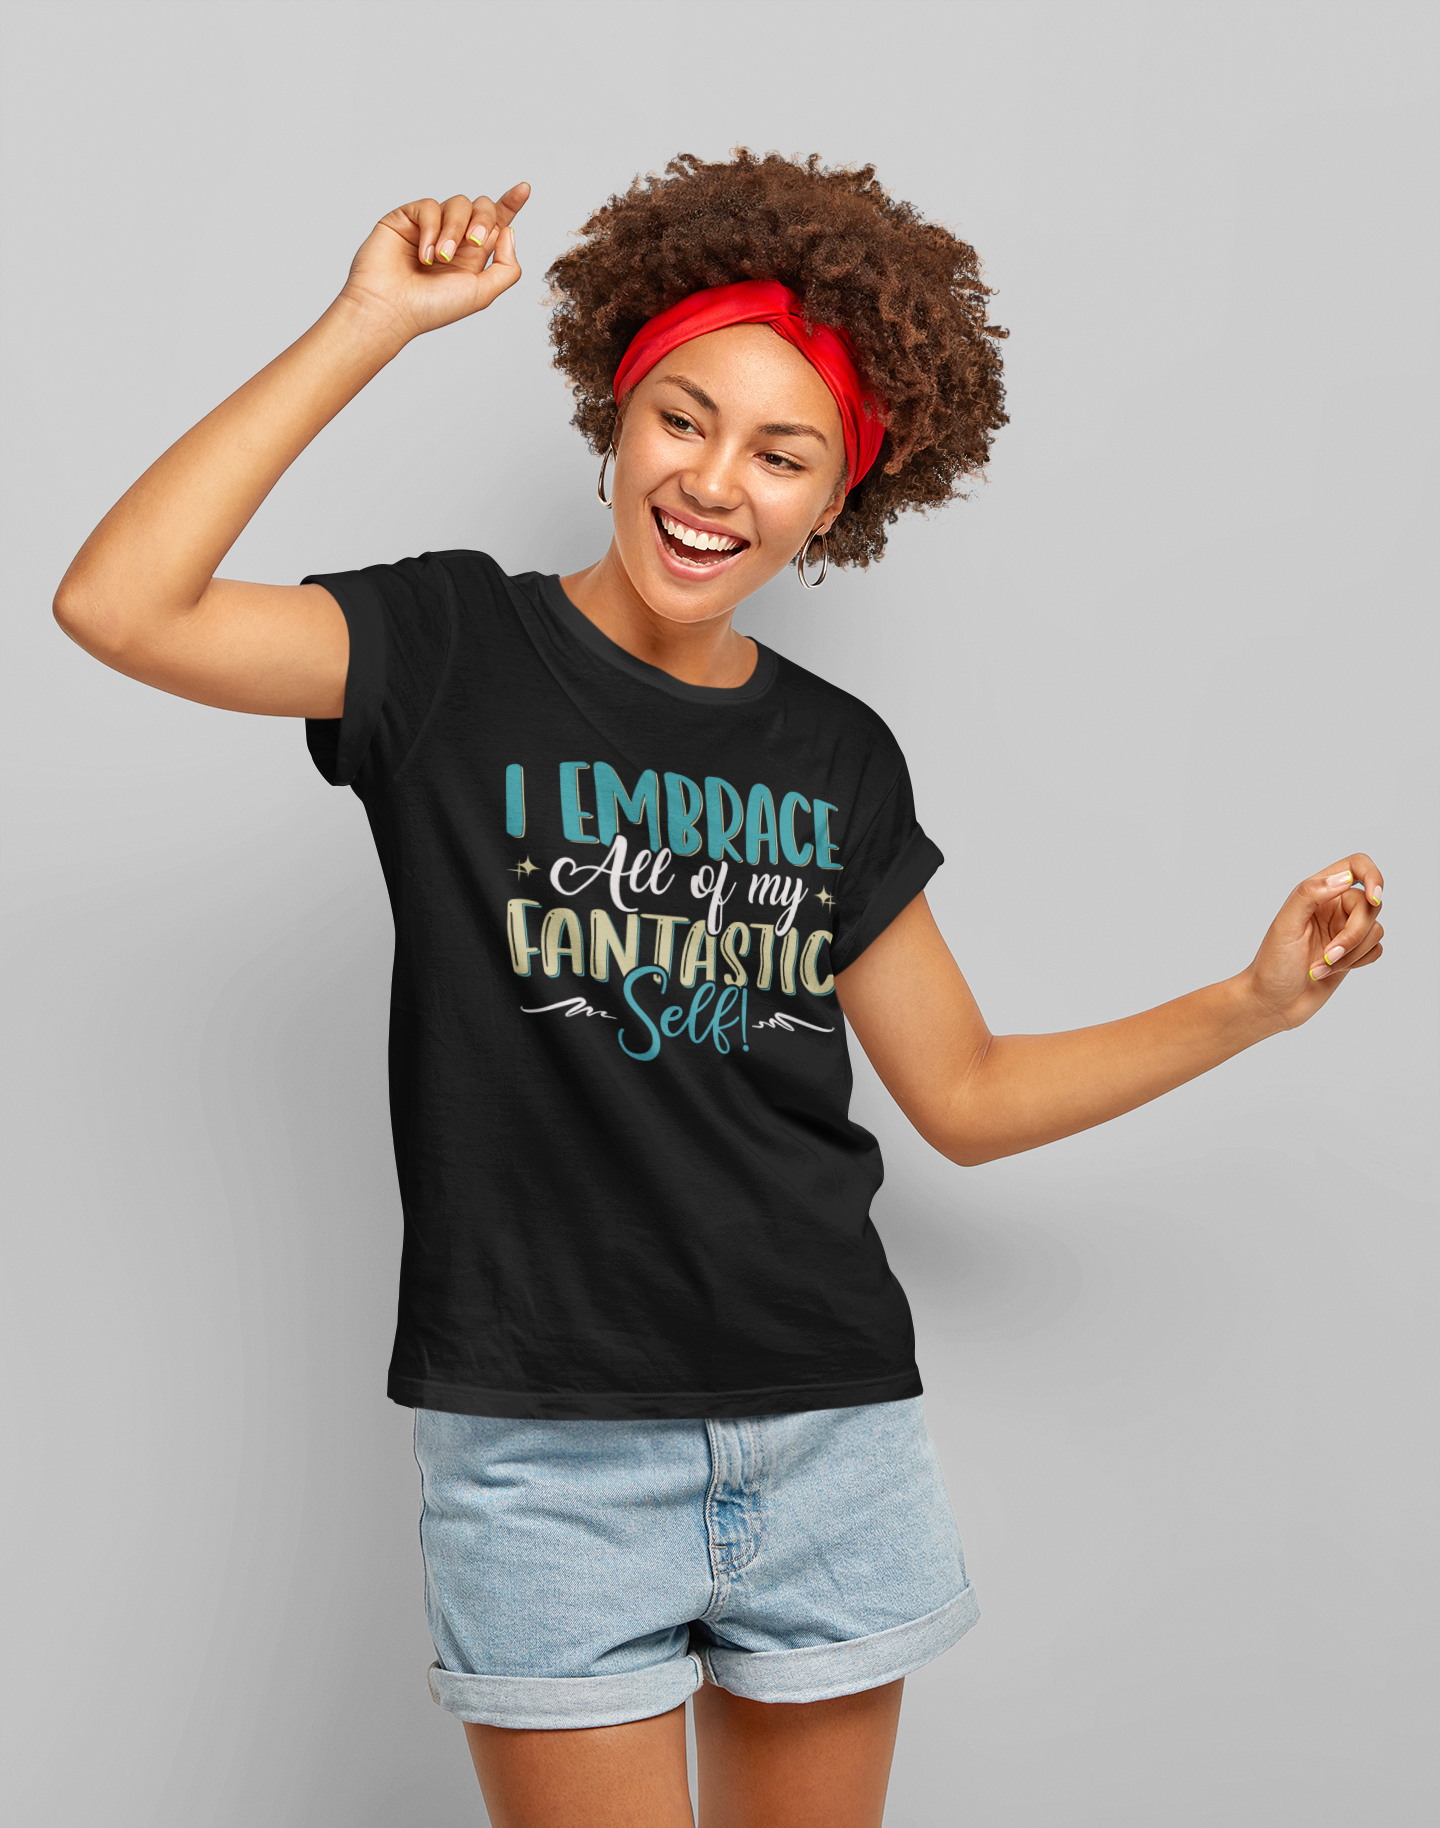 A woman wearing a black t-shirt that says "I Embrace All of My Fantastic Self" by Sharp Tact Kreativ | Tees & Gifts with Encouraging Messages to Brighten Your Day with a Bit of Wit.